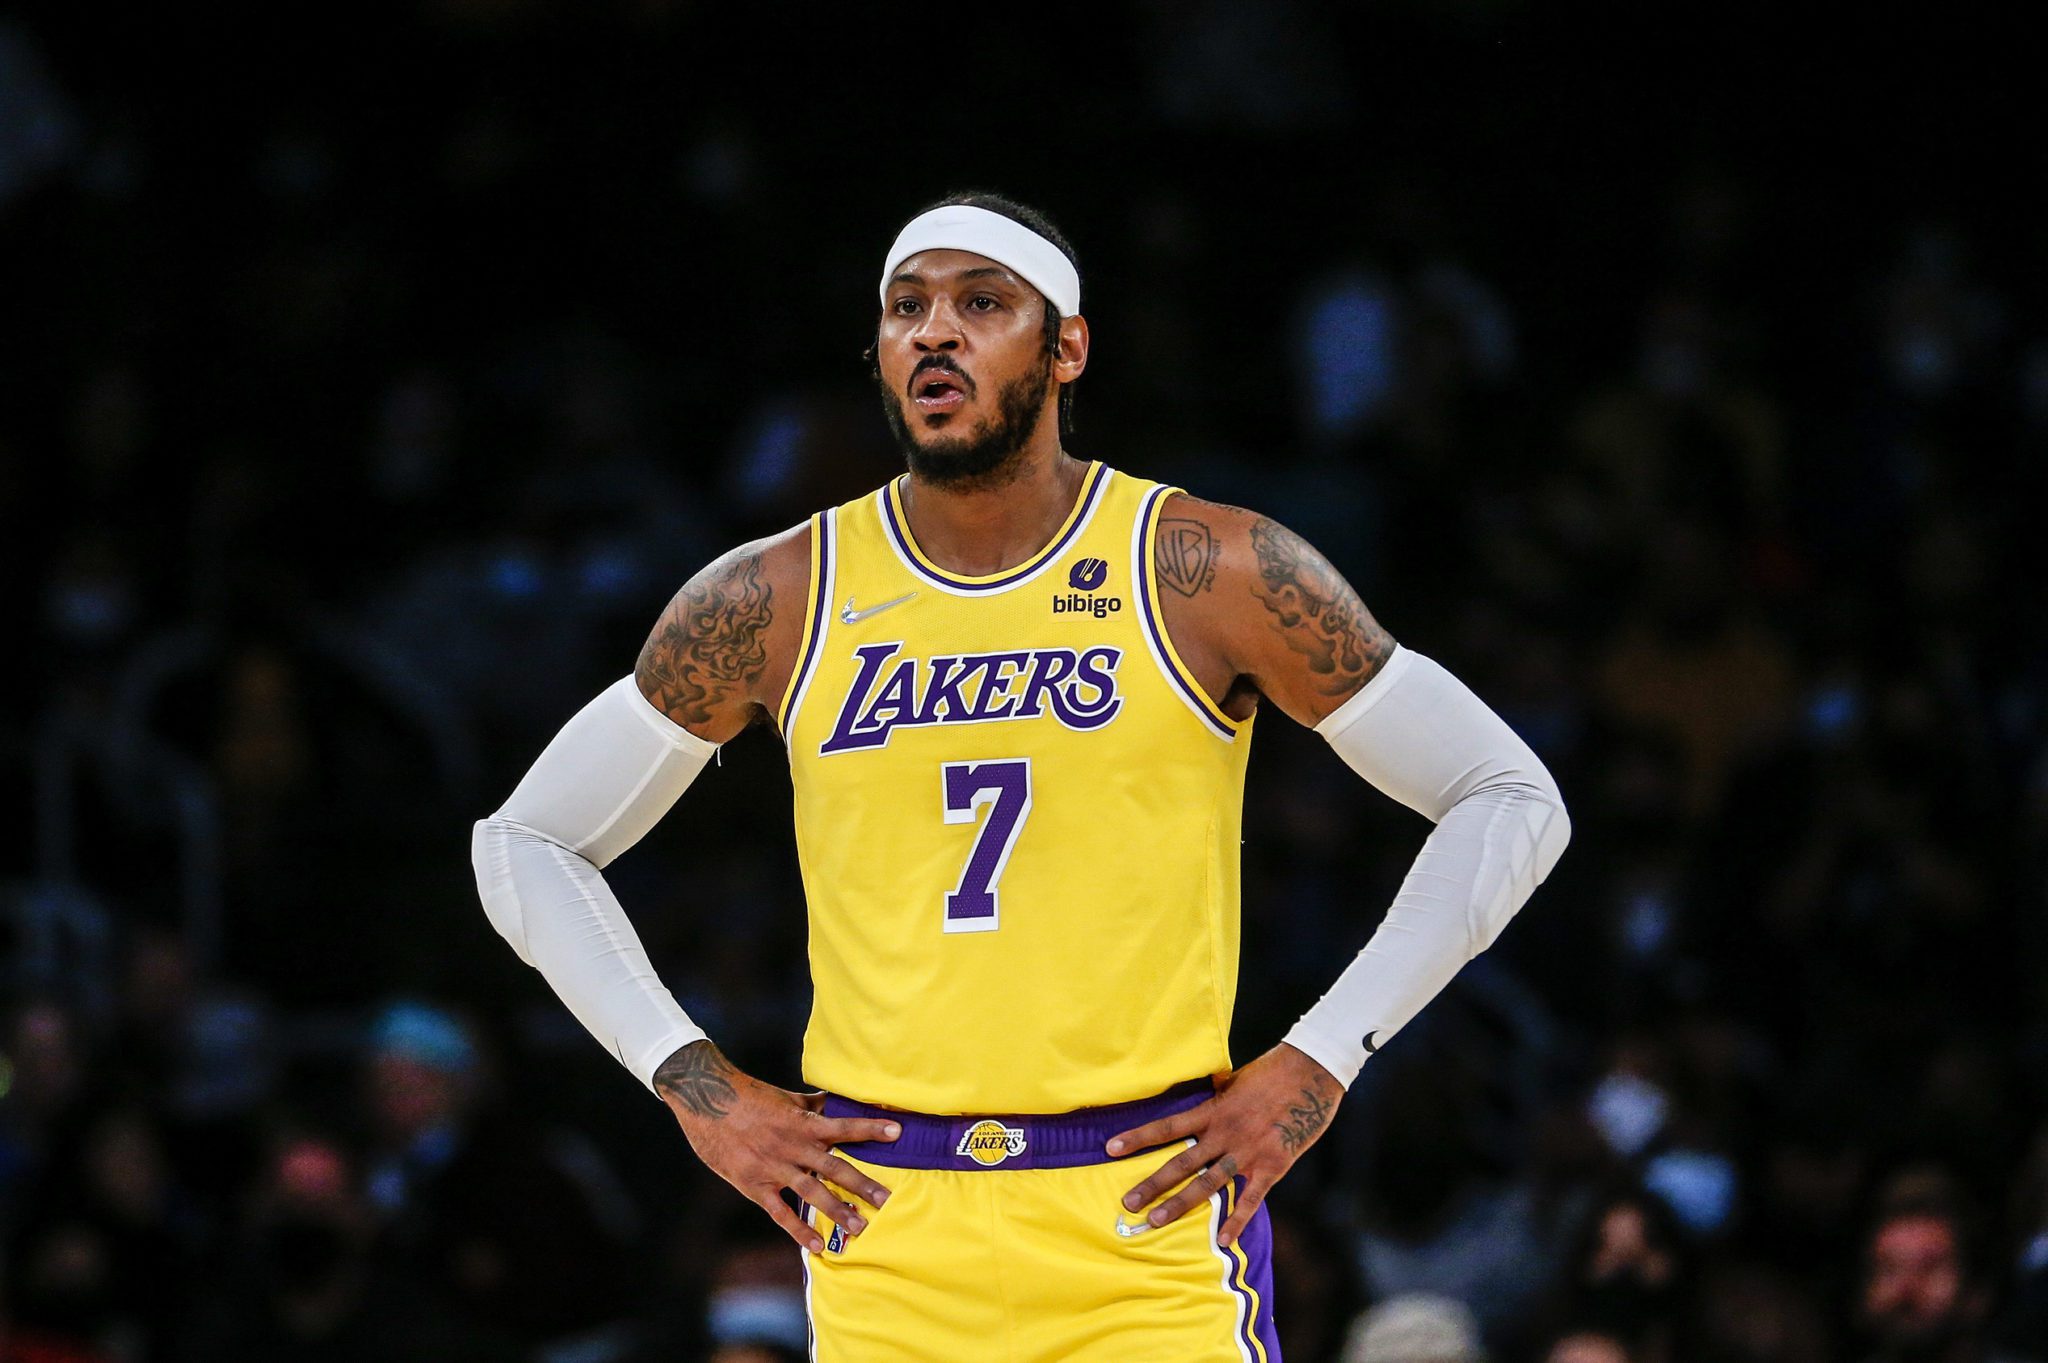 Carmelo Anthony Leads Lakers to First Win; Becomes 9th All-Time Leading Scorer